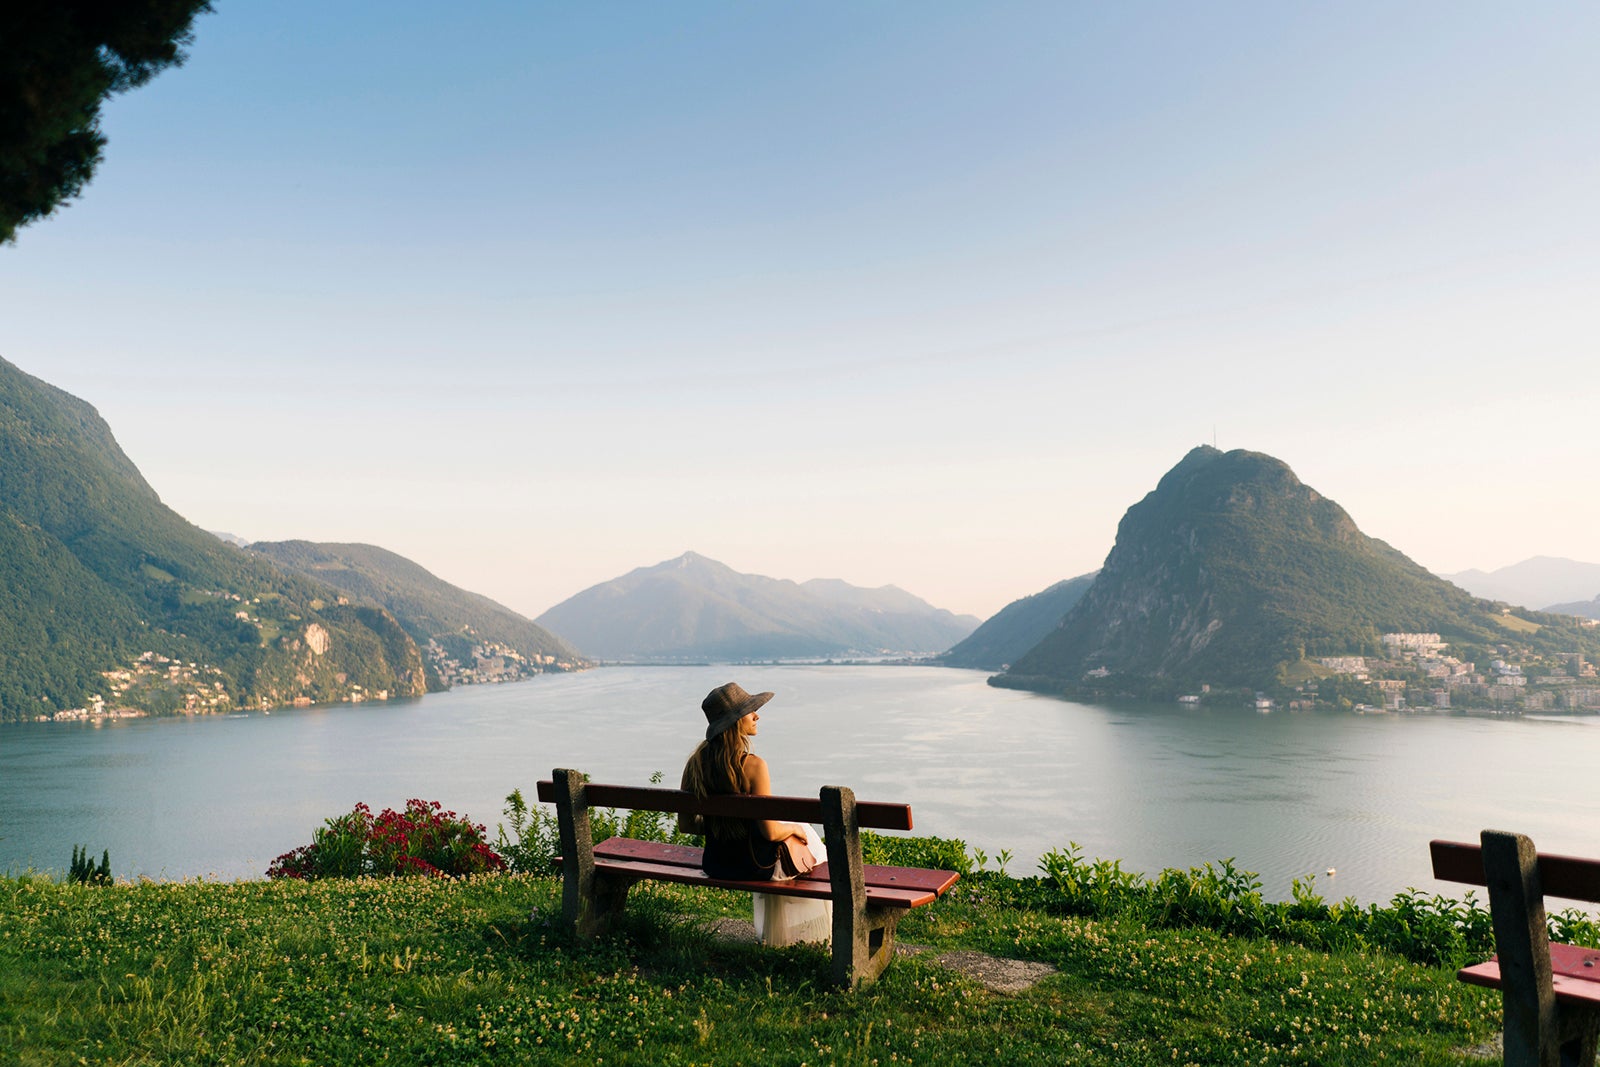 Woman relaxes above lake and mountains on bench